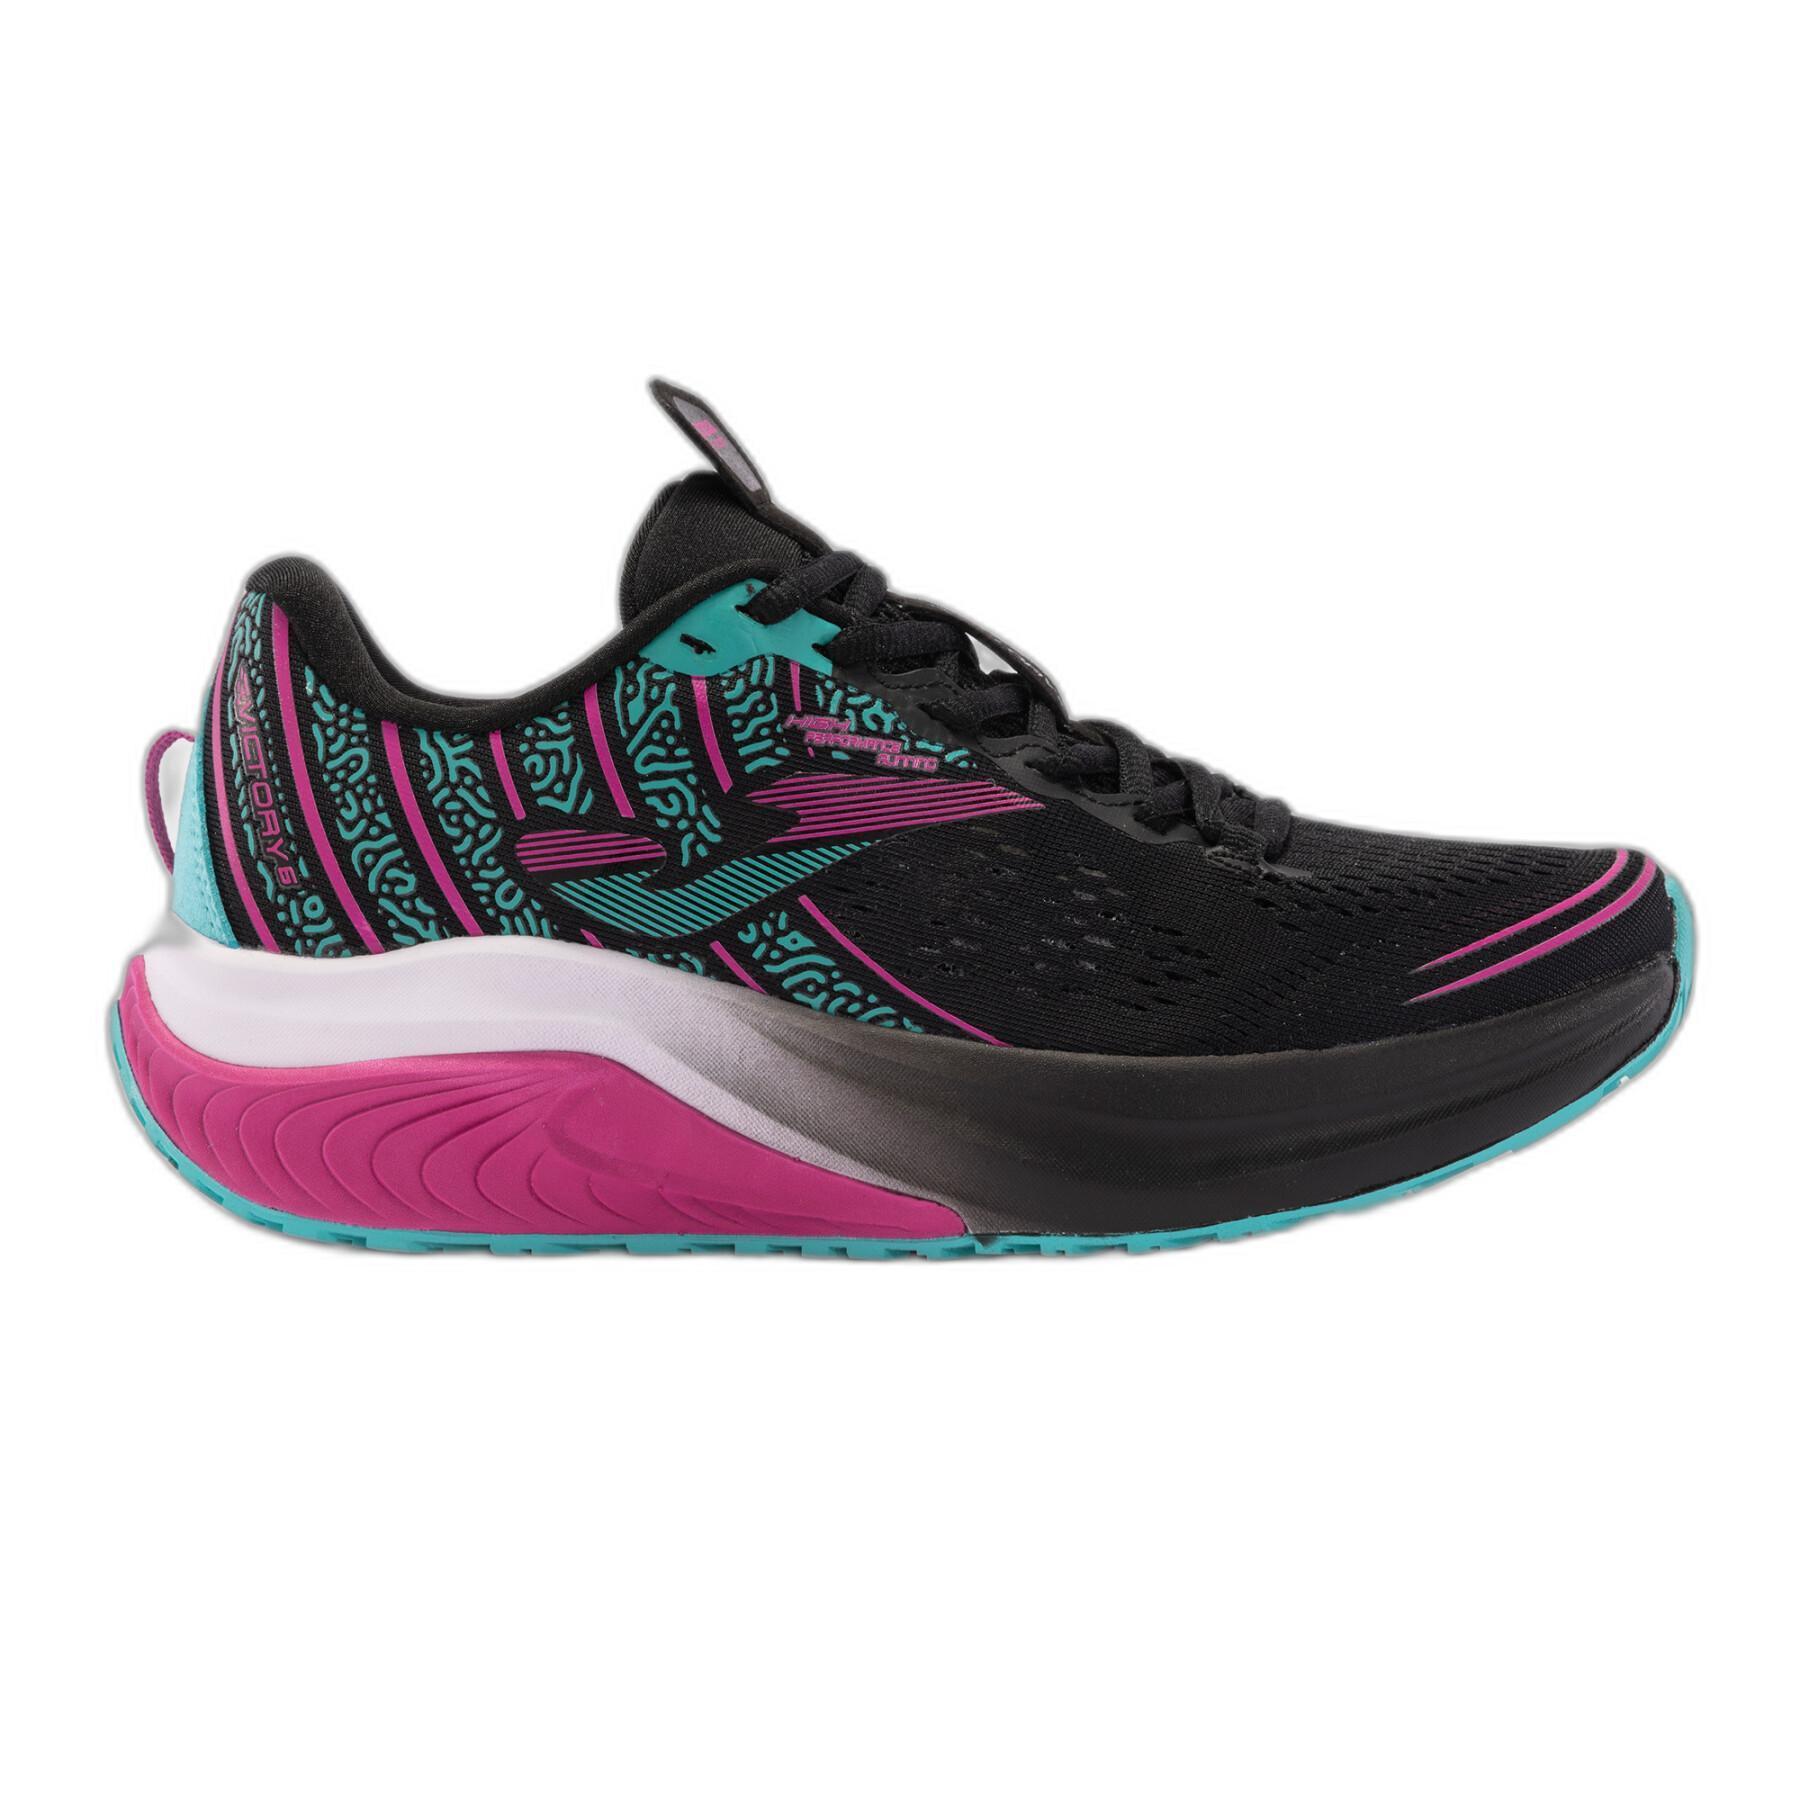 Women's running shoes Joma Victory 2401